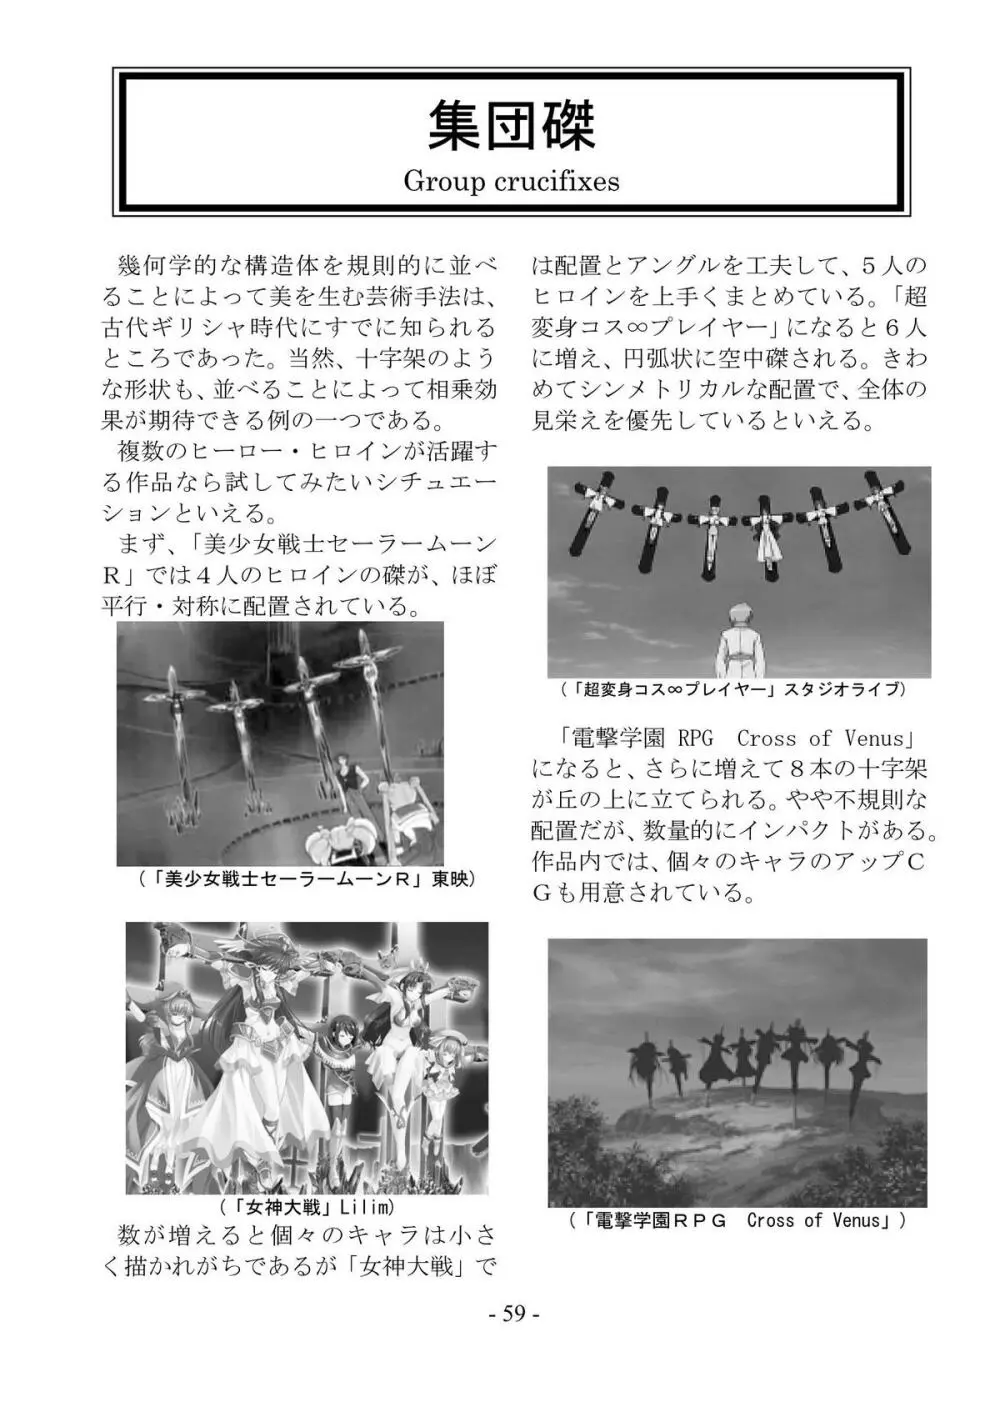 encyclopedia of crucifixion Page.60